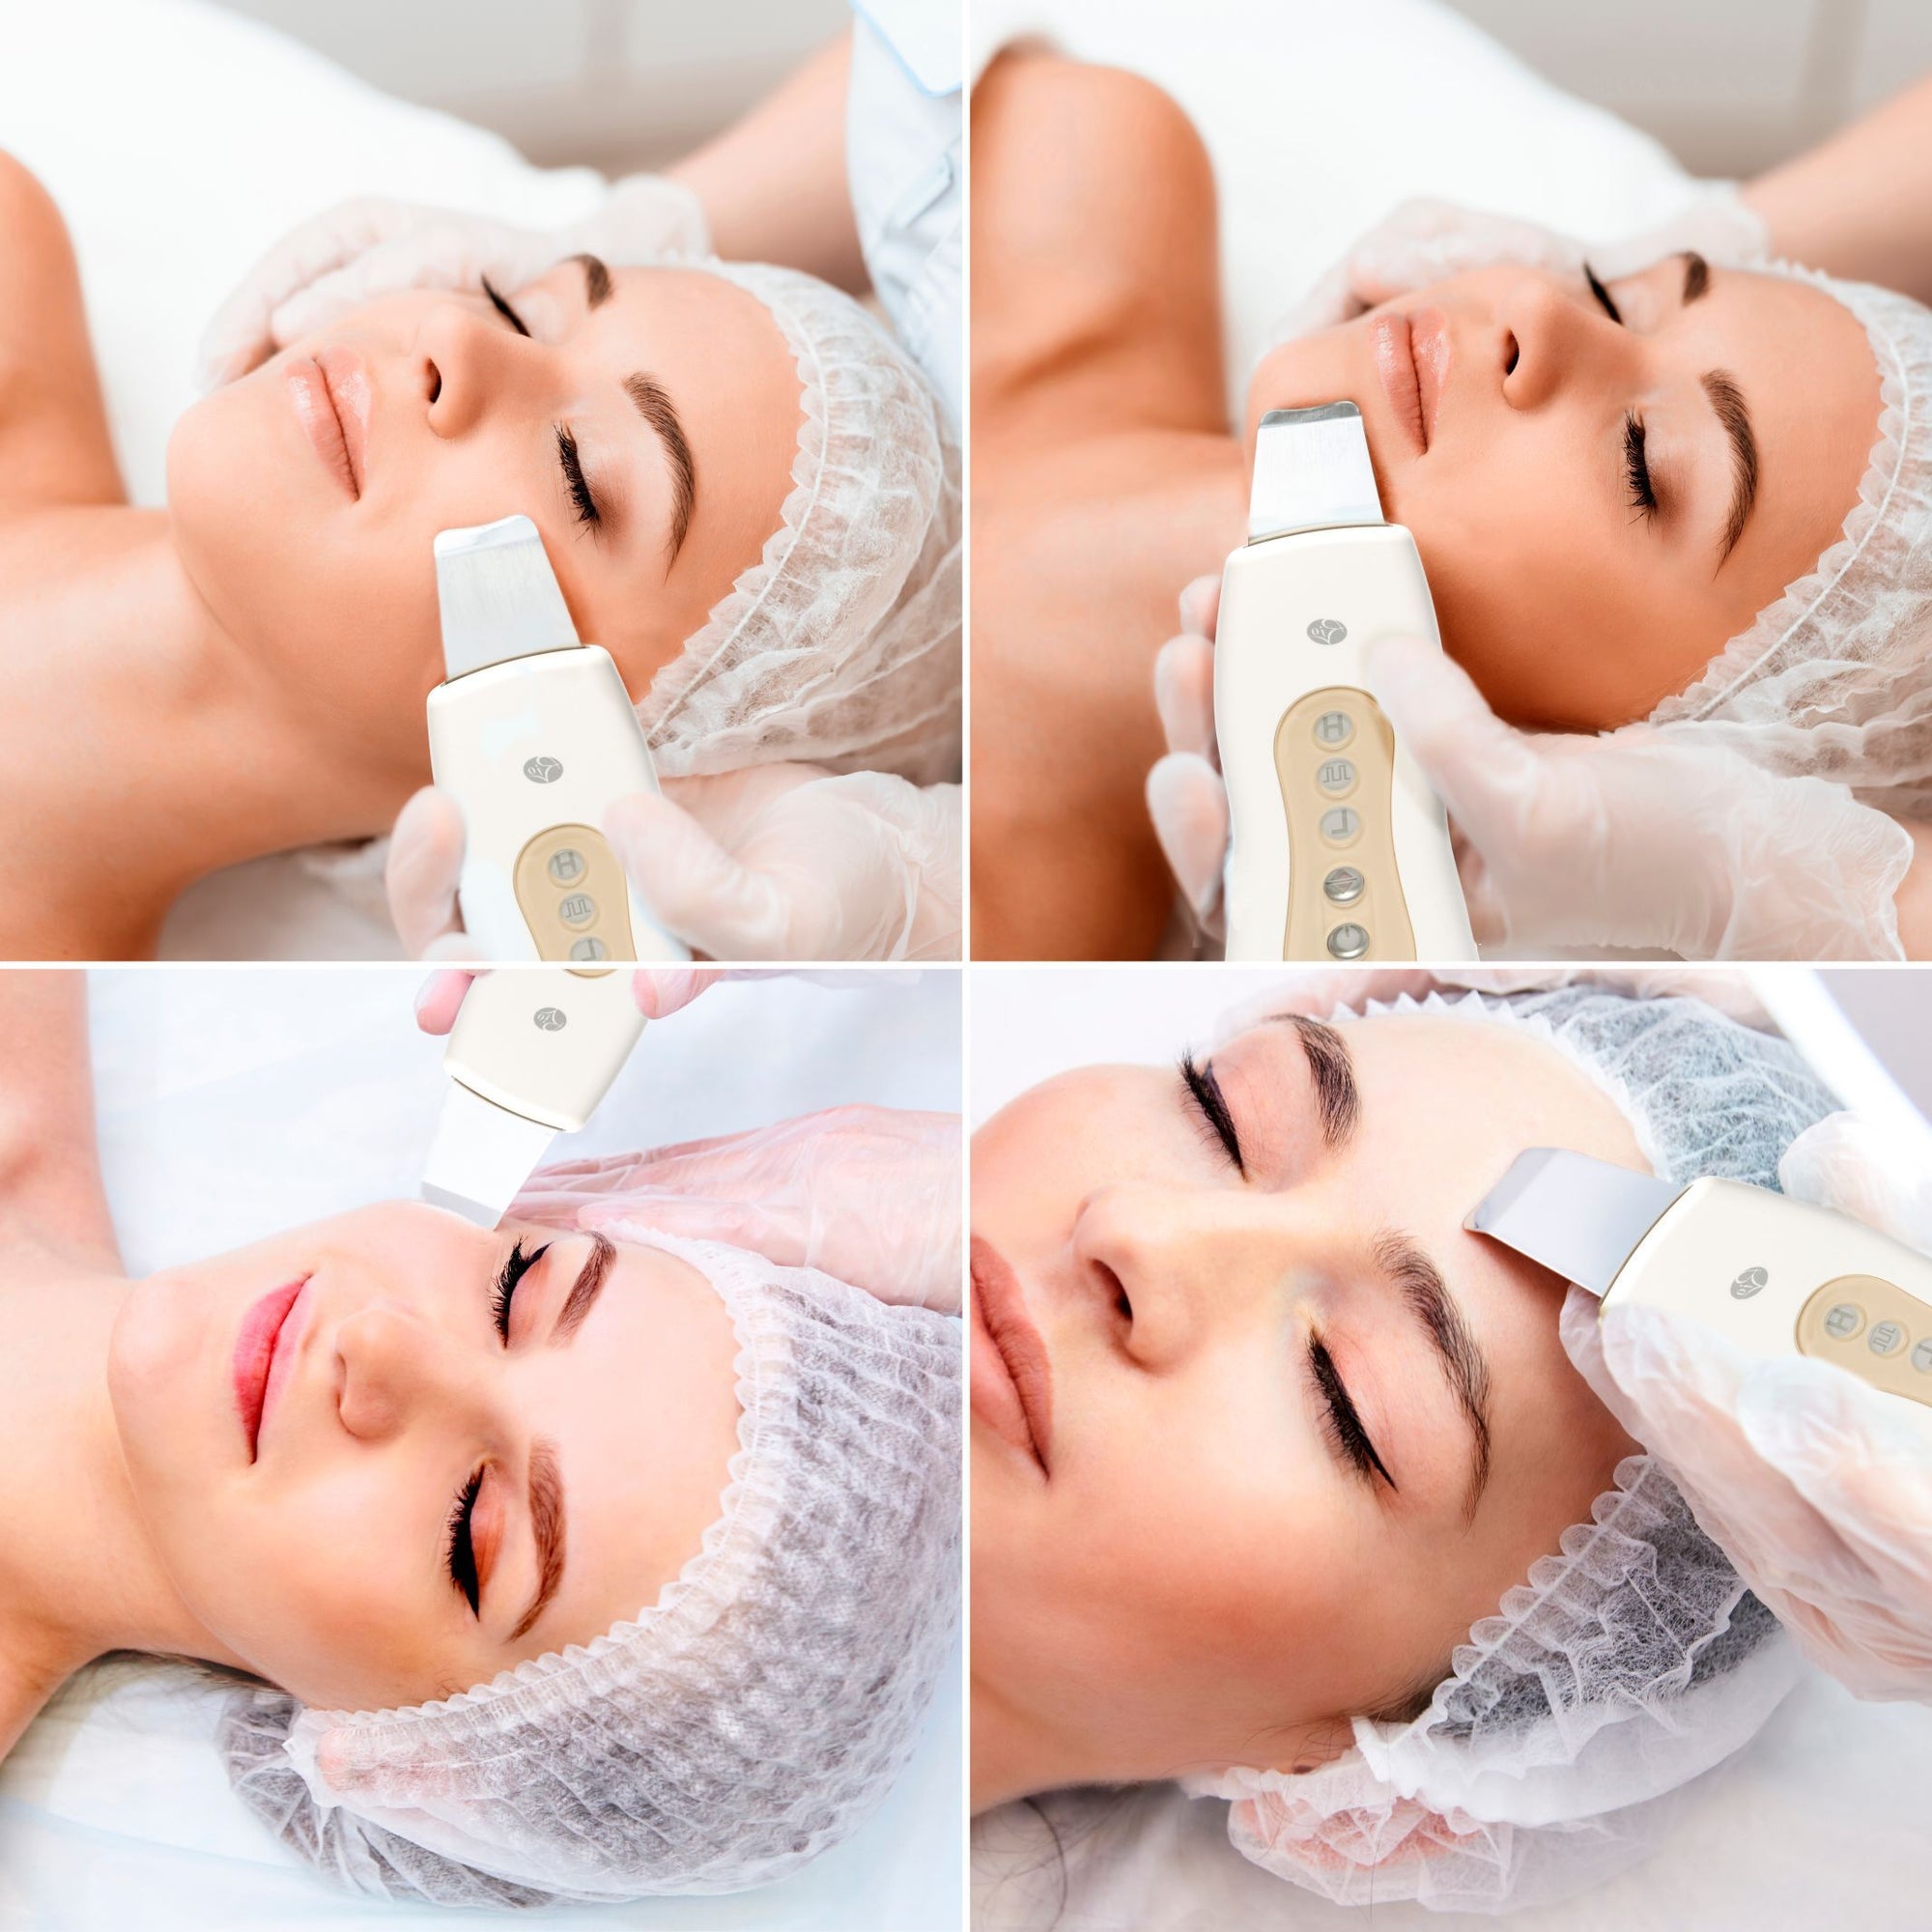 Ultrasonic Blade Facial showing use on different areas of the face